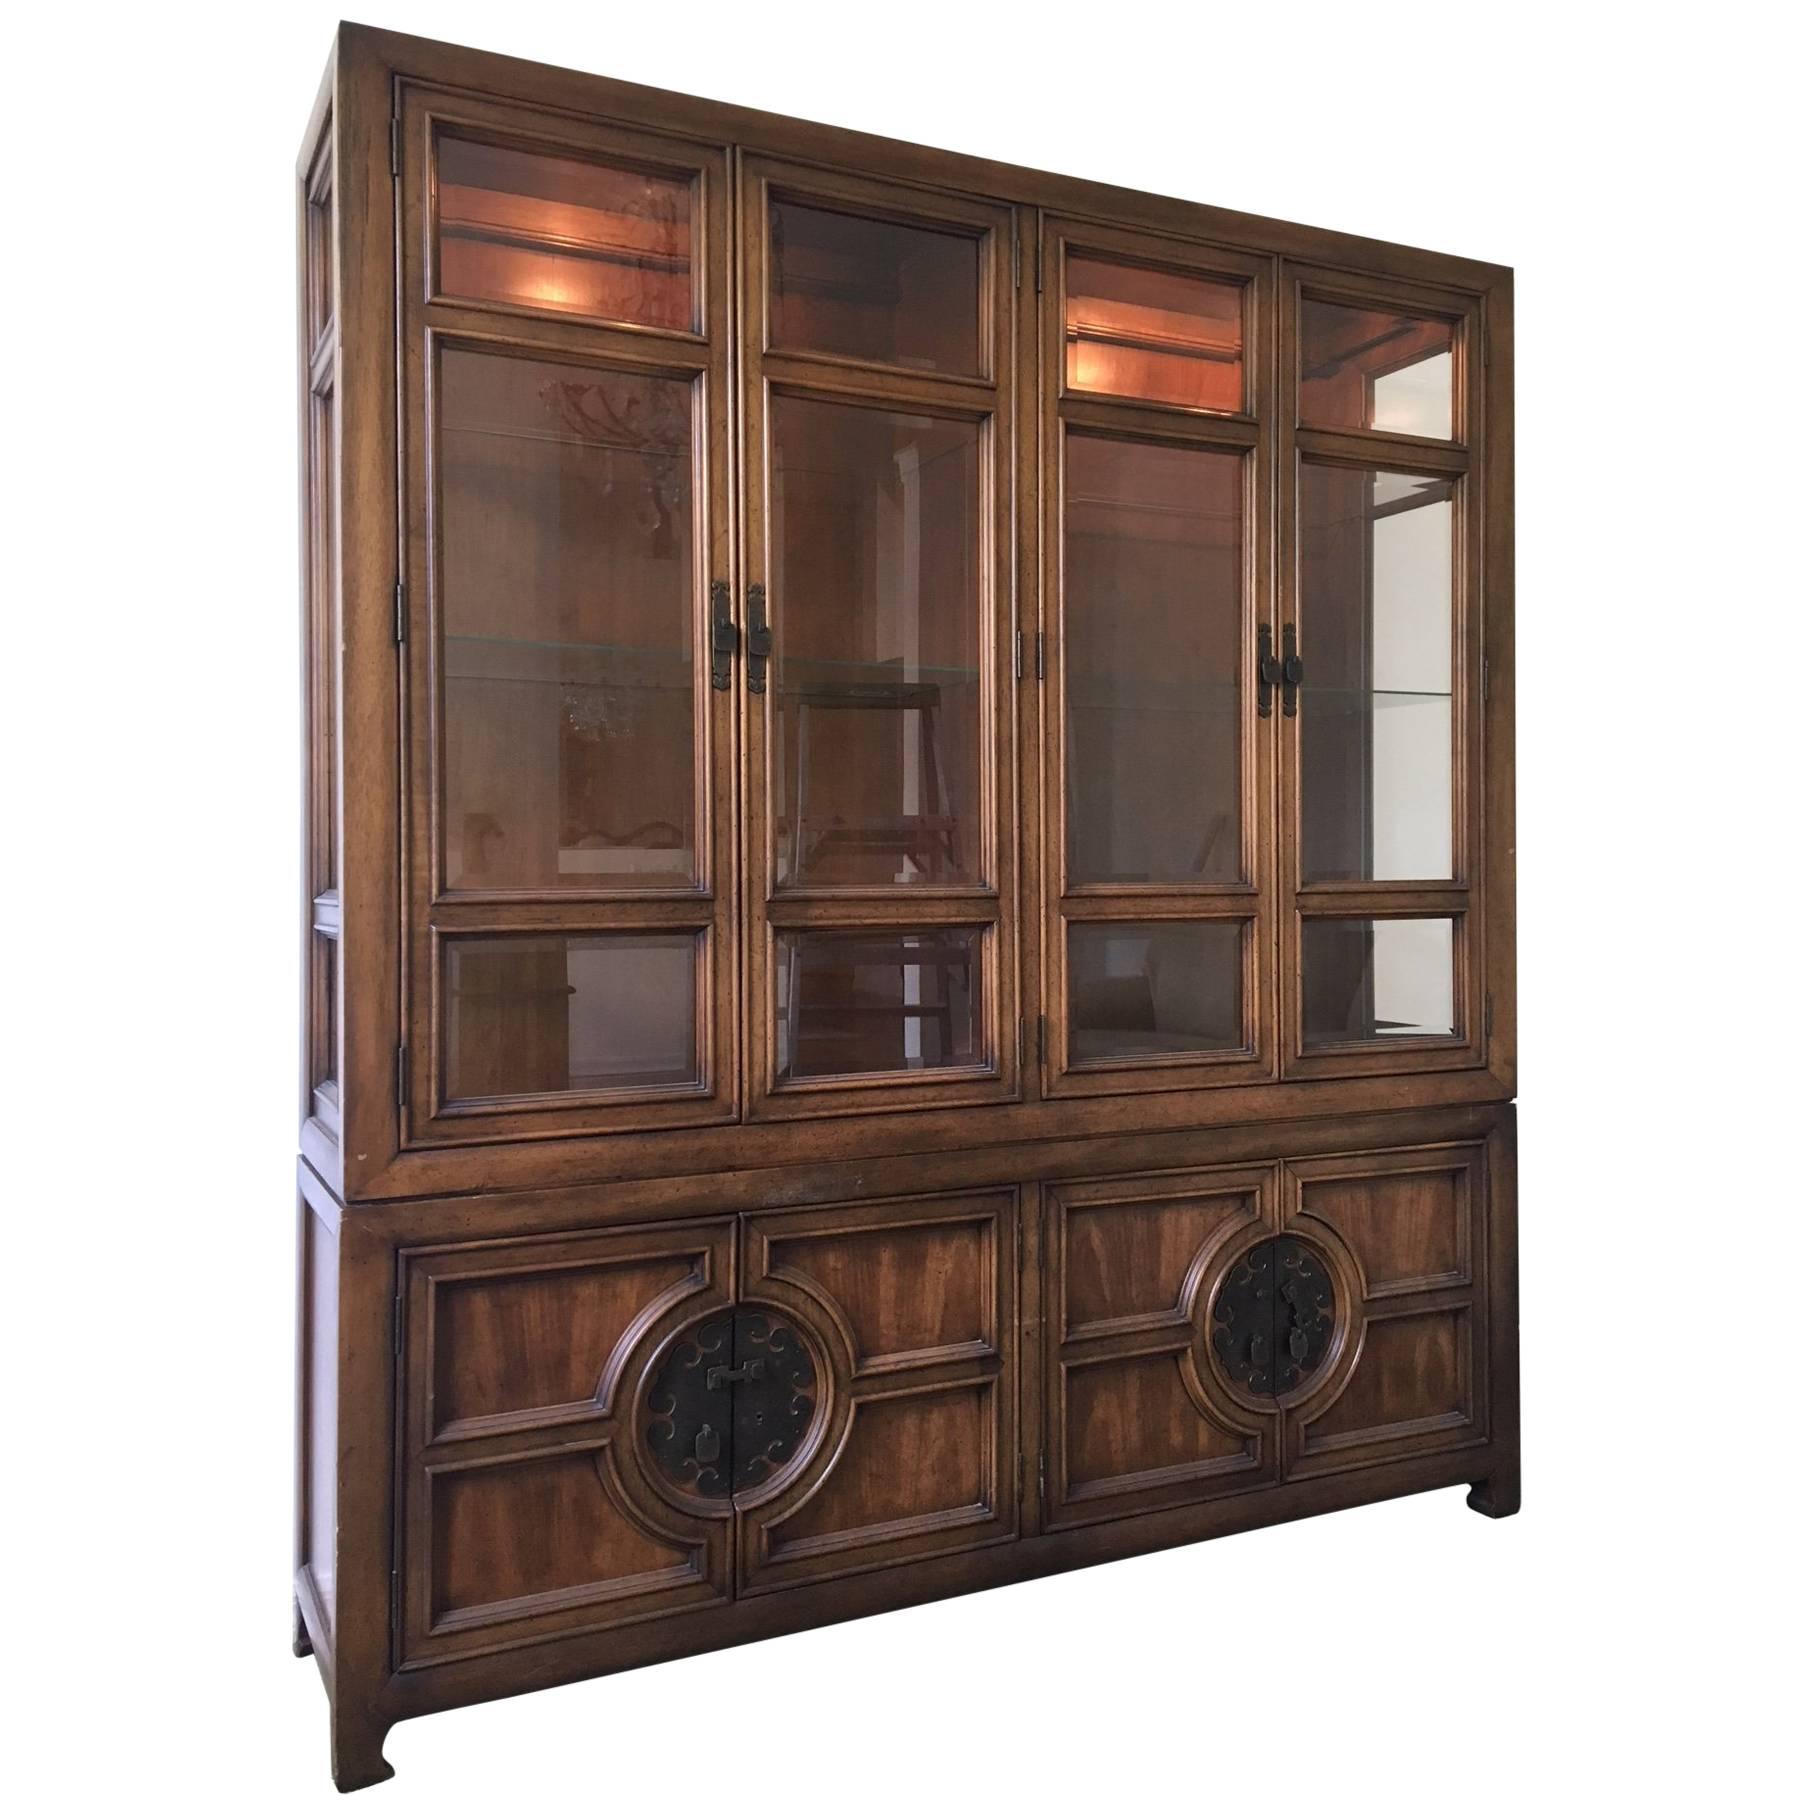 Asian Chinoiserie Lighted Cabinet by Century